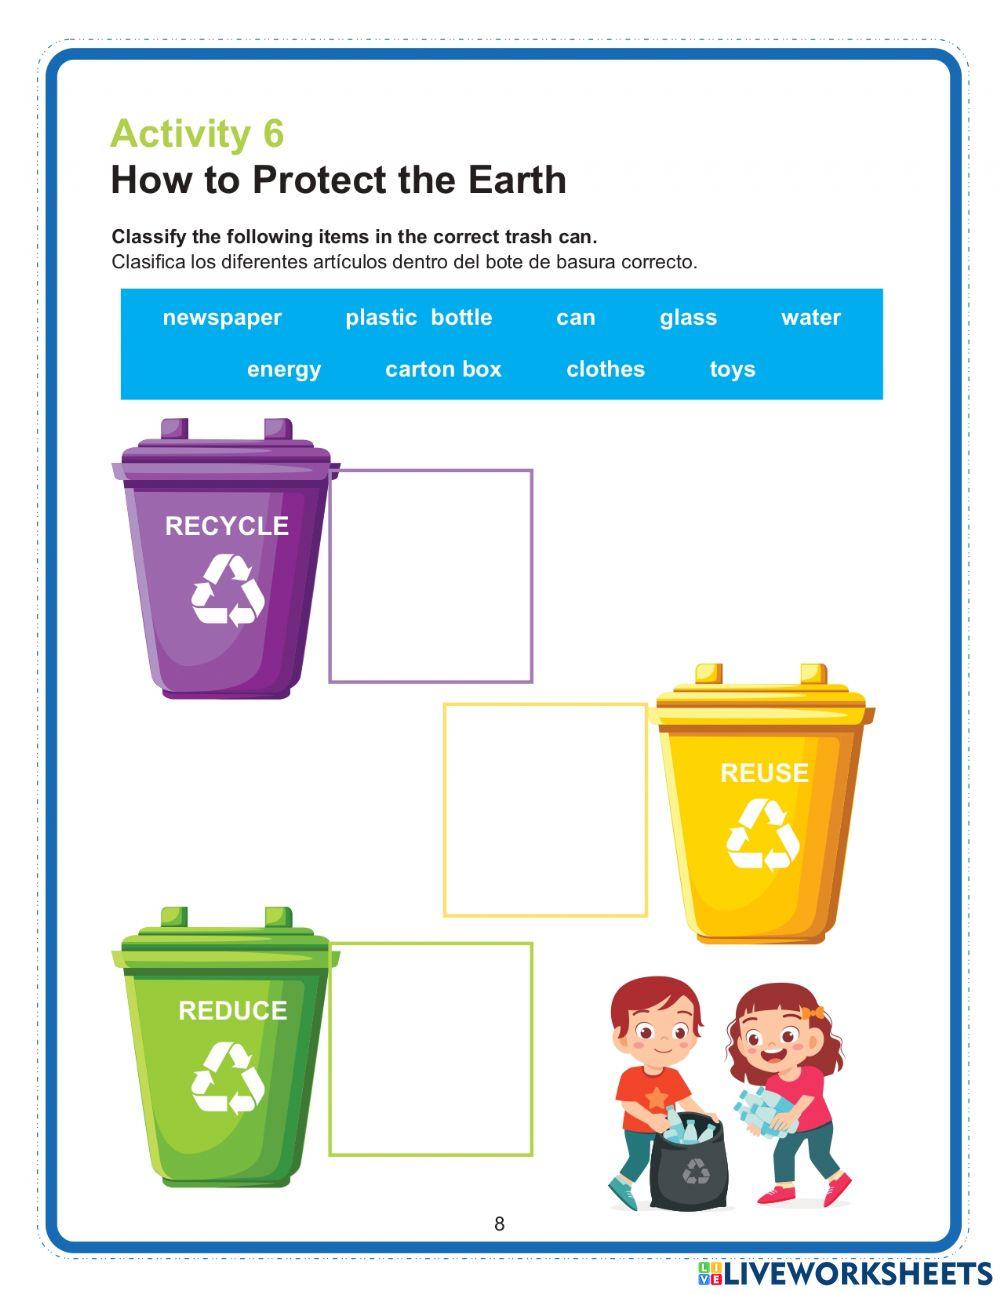 How to Protect the Earth